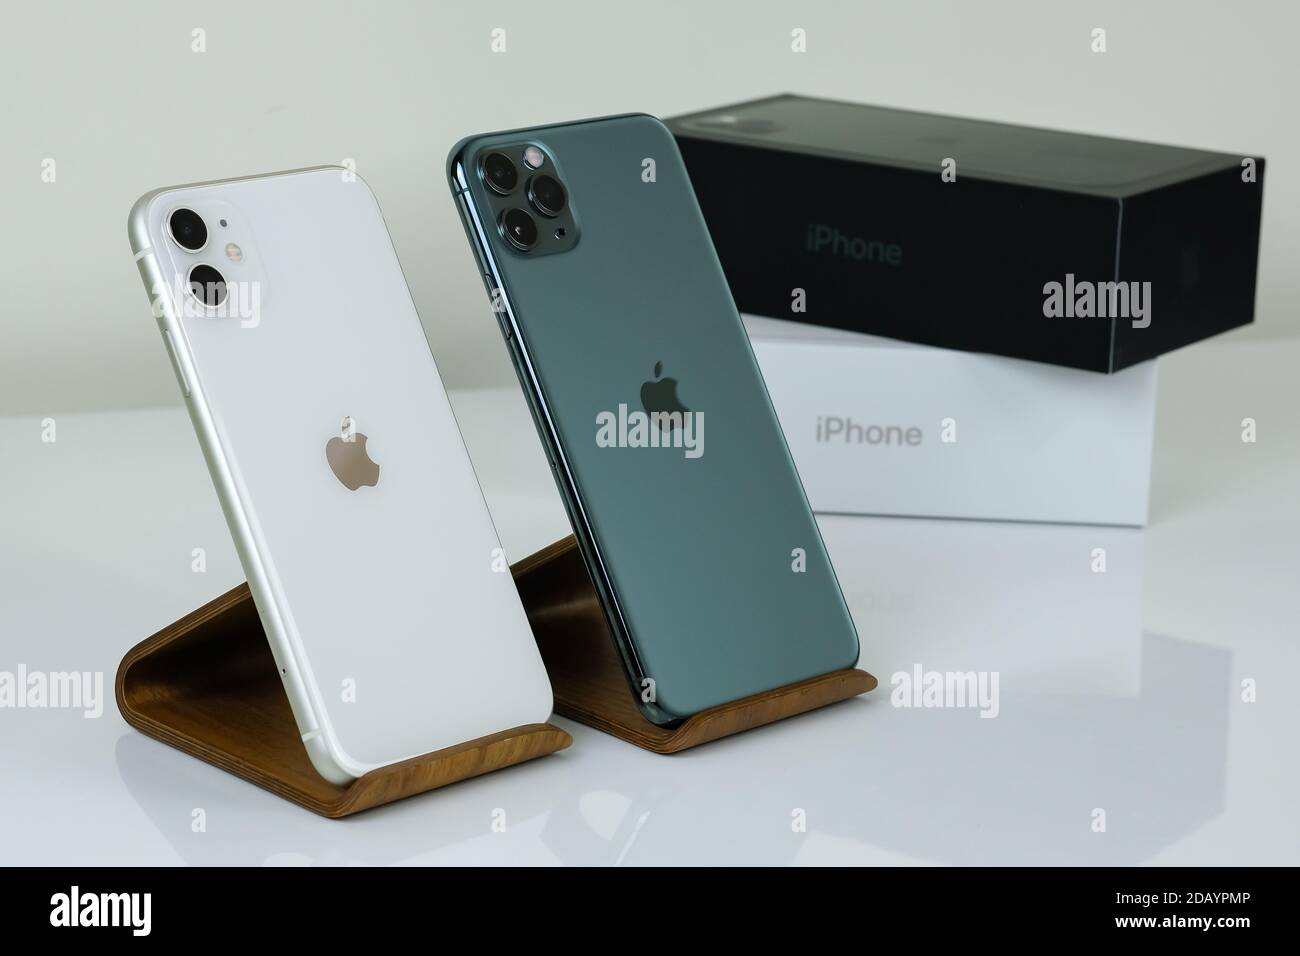 Iphone 11 Pro Max In Midnight Green Next To Iphone 11 In White Stock Photo Alamy